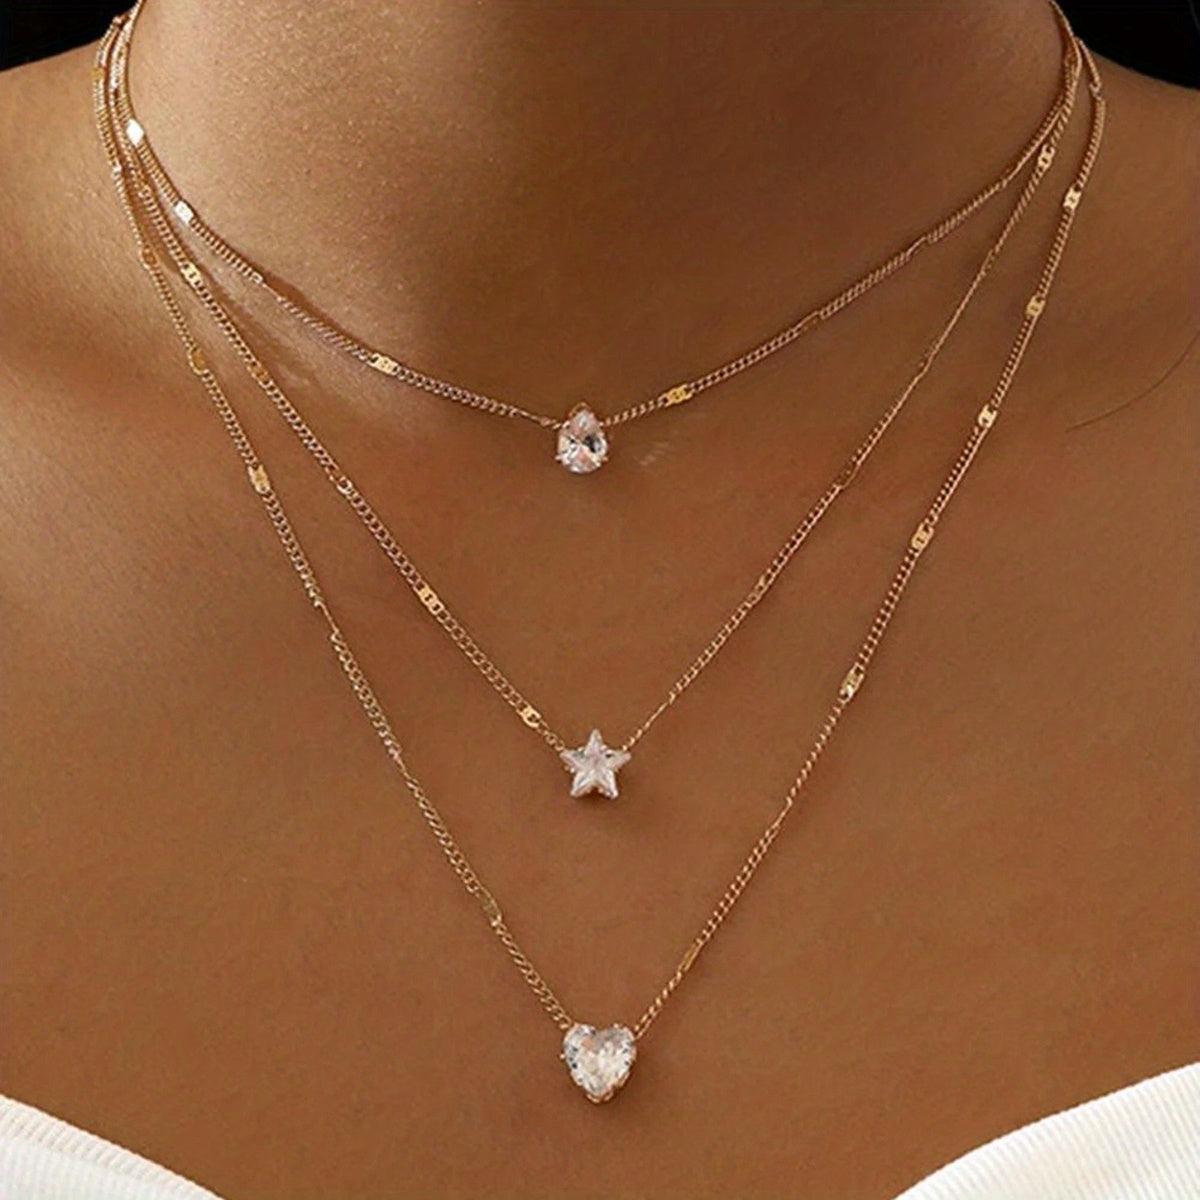 5 Styles Love Butterfly Moon Zircon Pendant Necklace For Women Teen Daughter Jewelry Birthday Gifts